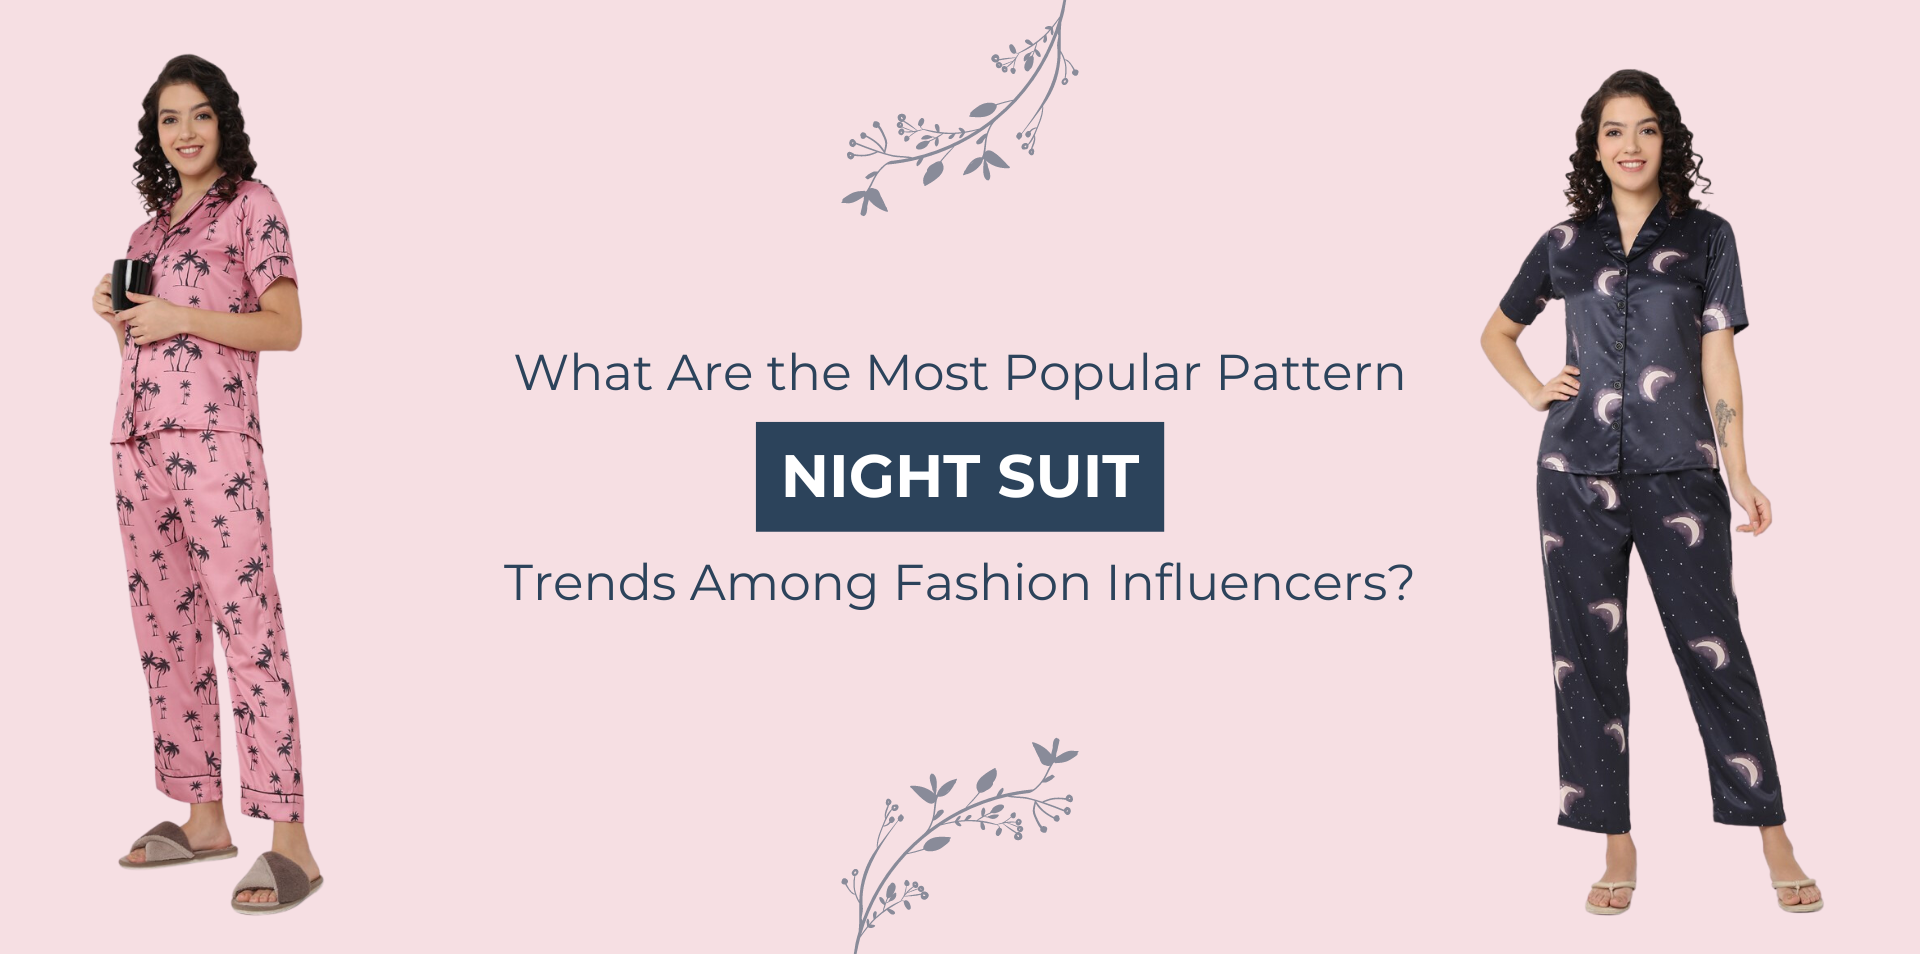 What Are the Most Popular Pattern Night Suit Trends Among Fashion Influencers?